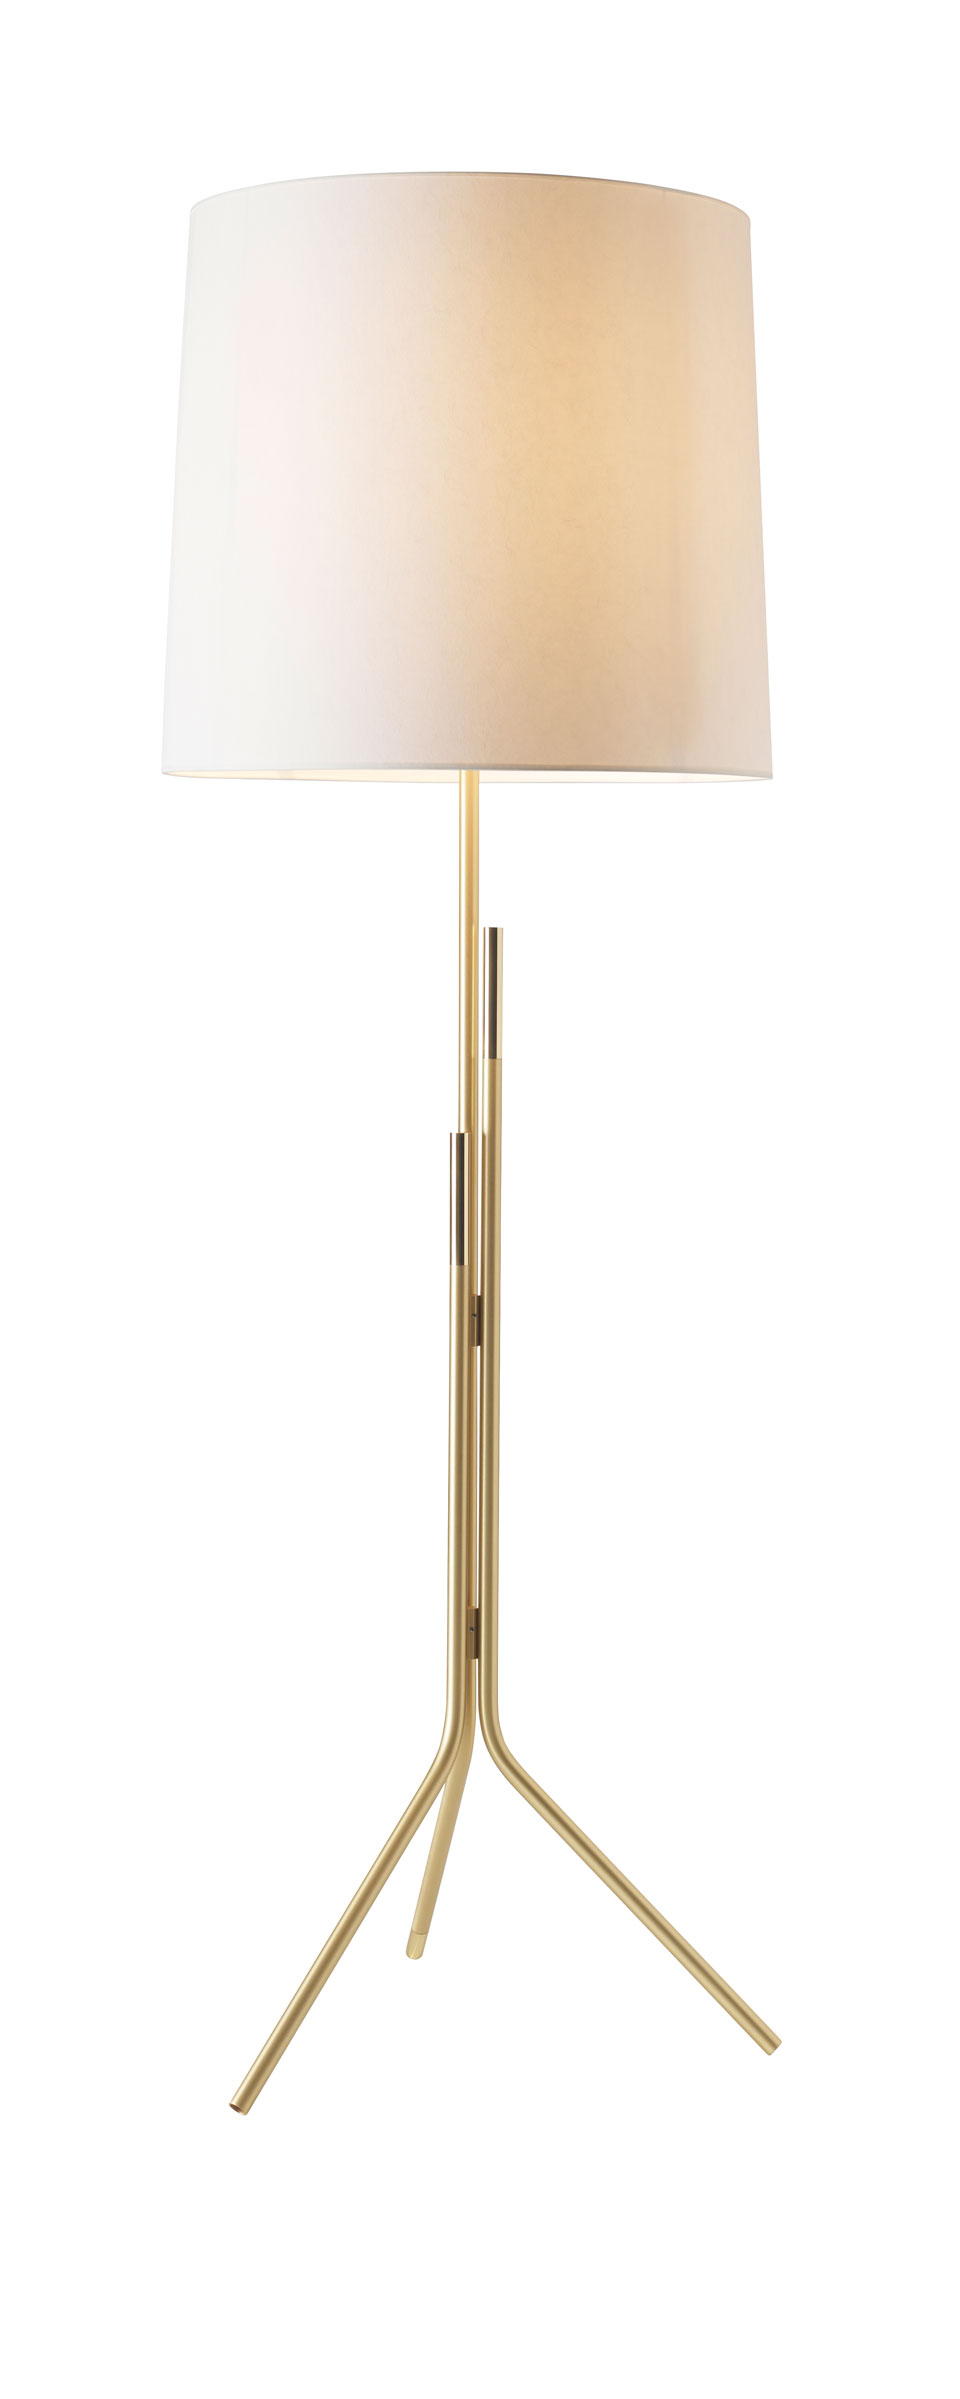 Contemporary Floor Lamp Brass Stand Cylindrical Shade In White Drop Paper Design Herv Langlais pertaining to size 960 X 2399